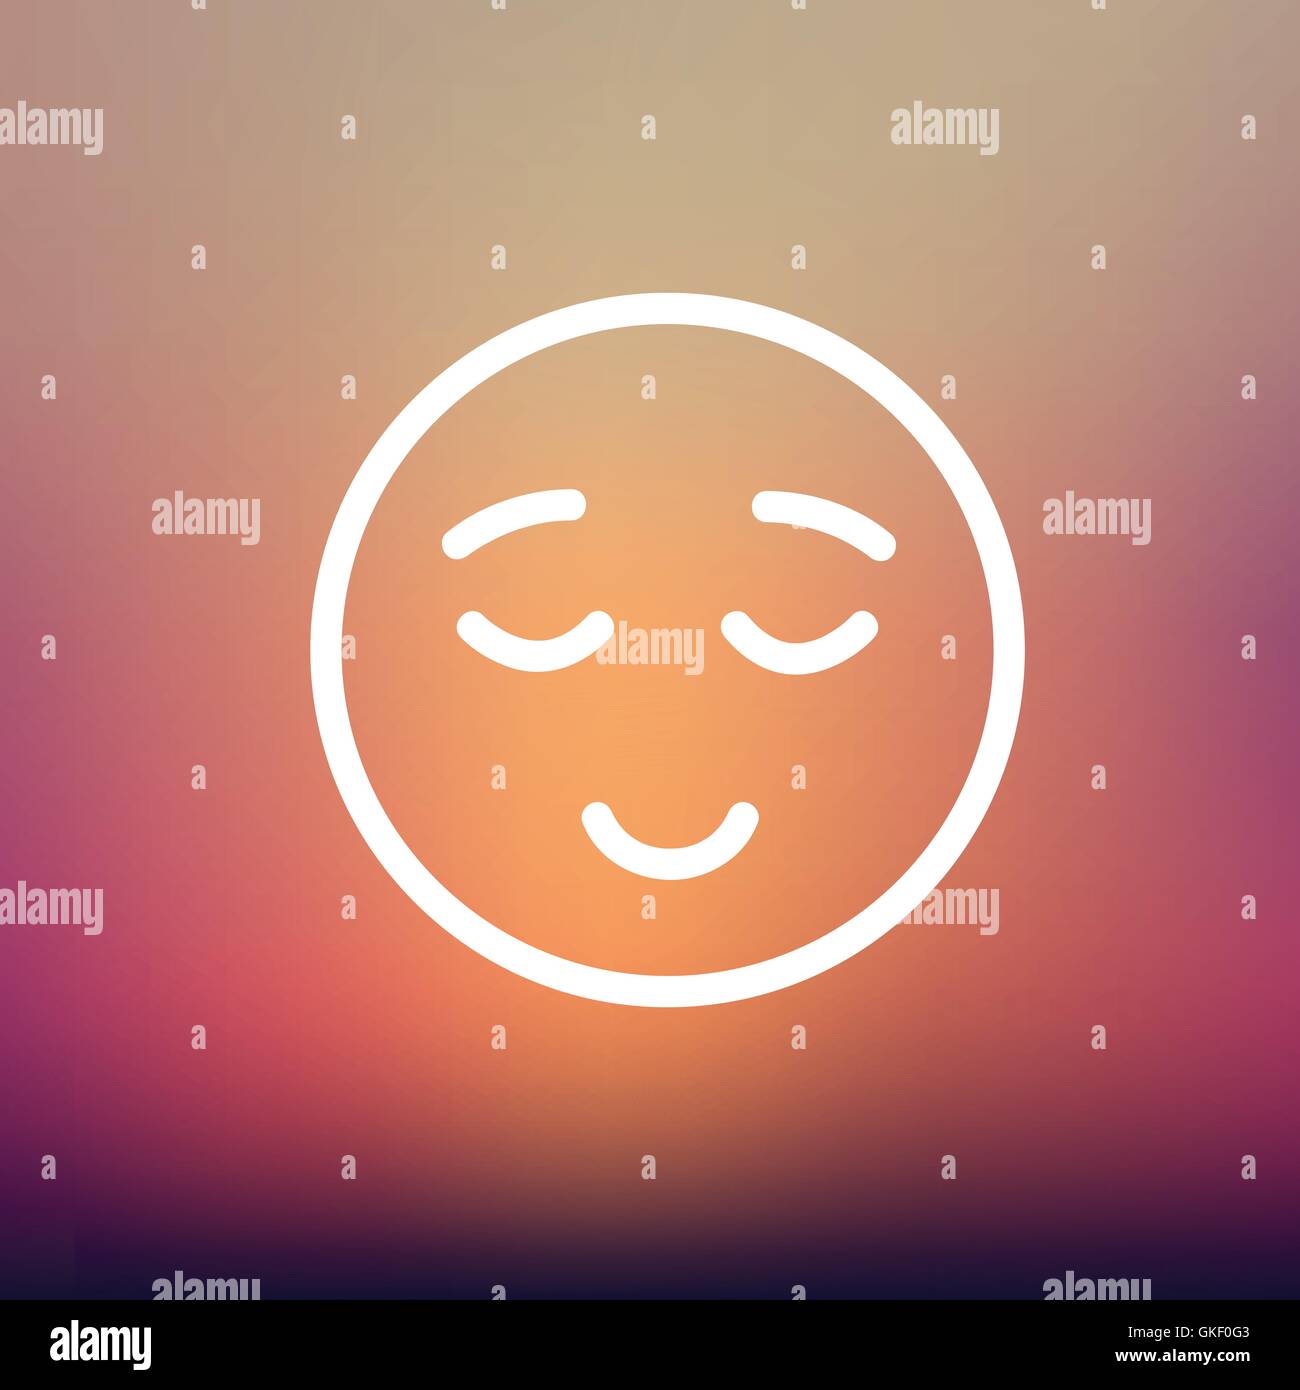 Smiling while sleeping thin line icon Stock Vector